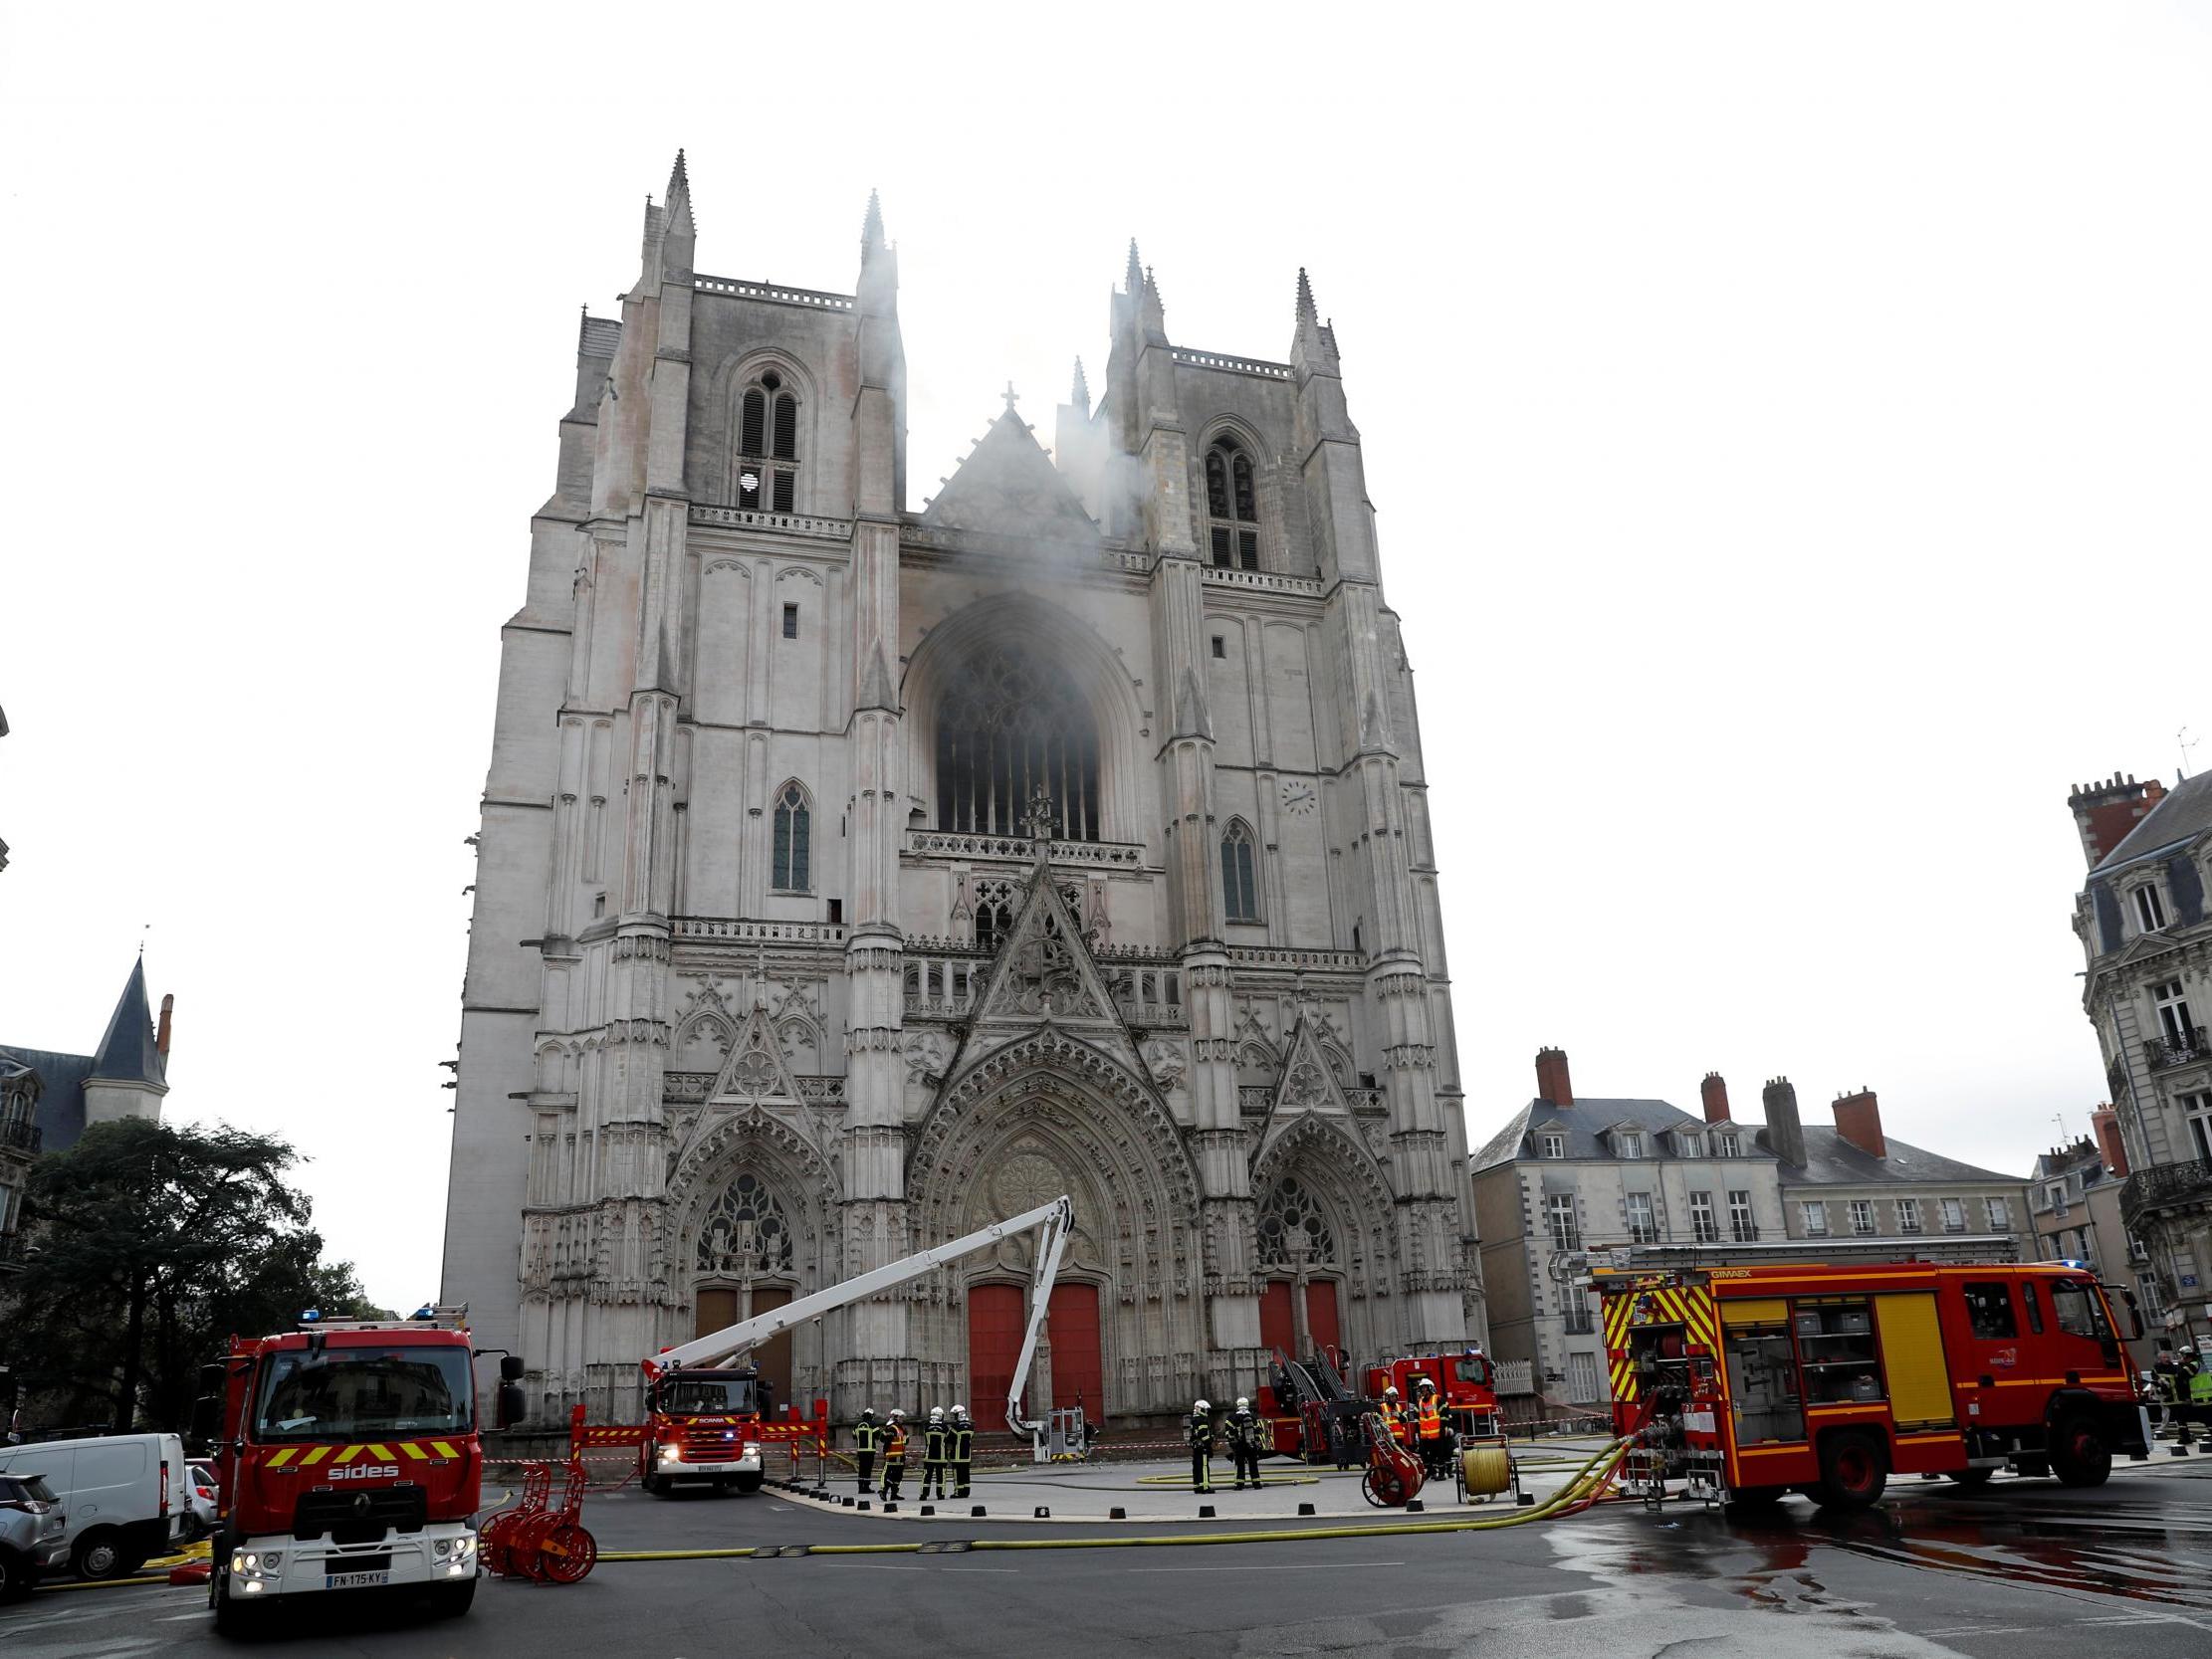 French firefighters gather at the scene of a blaze at the Cathedral of Saint Pierre and Saint Paul in Nantes on Saturday (REUTERS/Stephane Mahe)